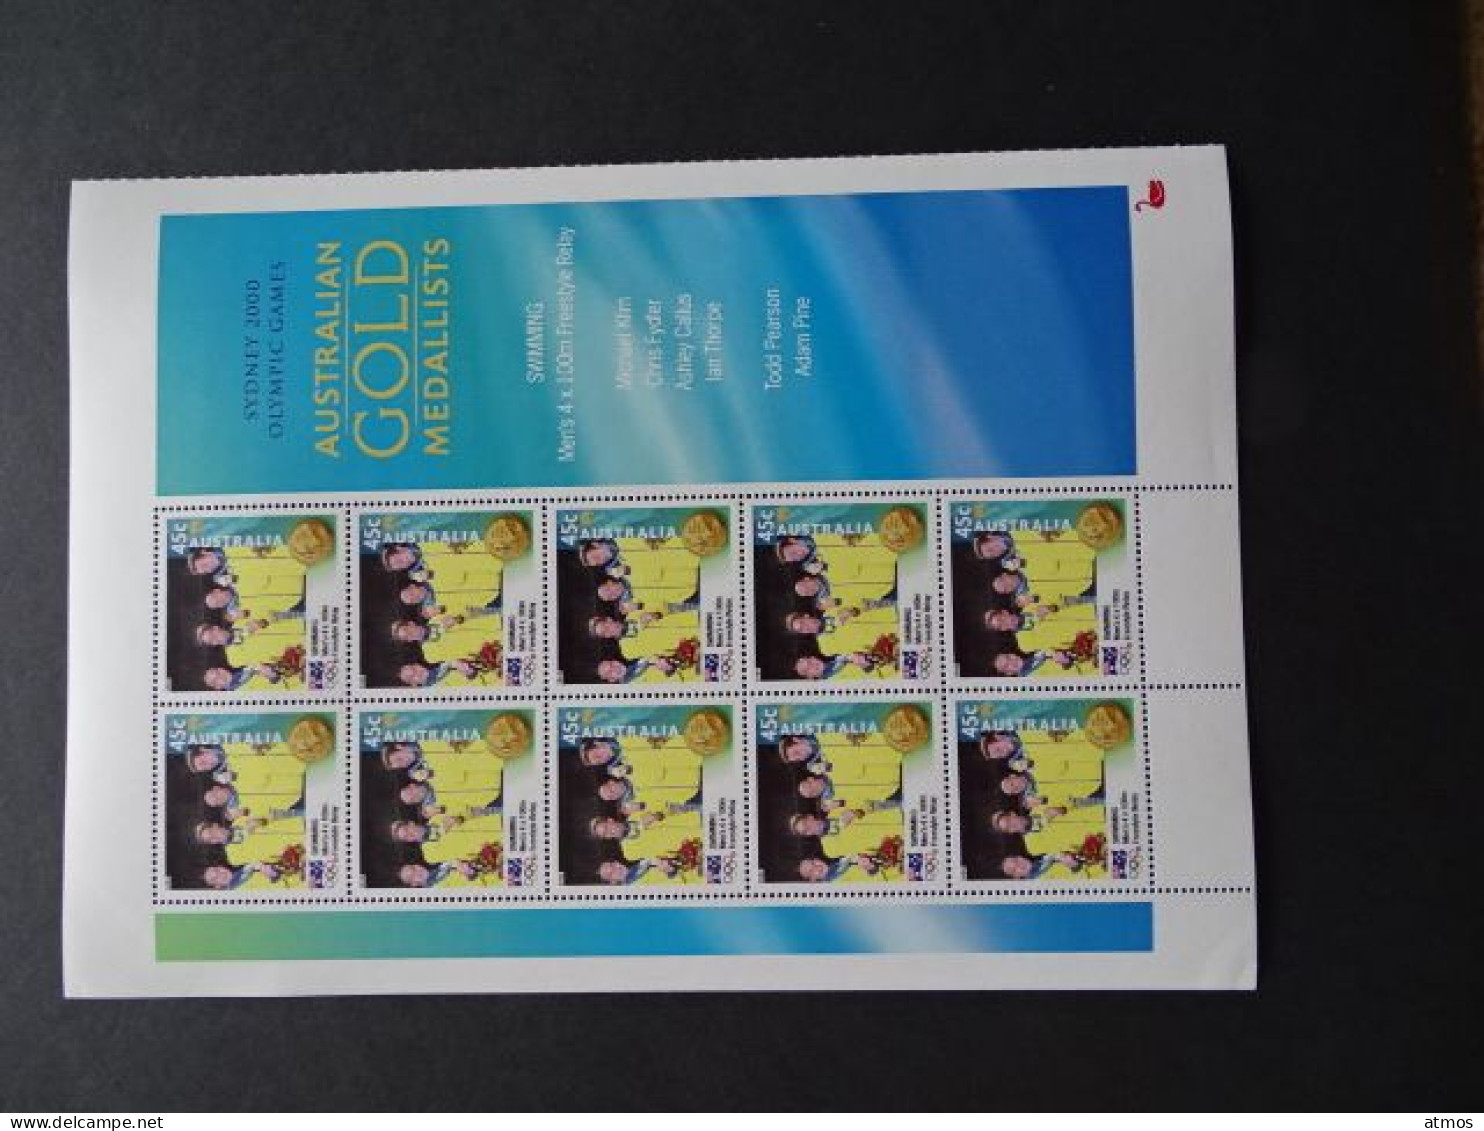 Australia MNH Michel Nr 1974 Sheet Of 10 From 2000 WA - Mint Stamps